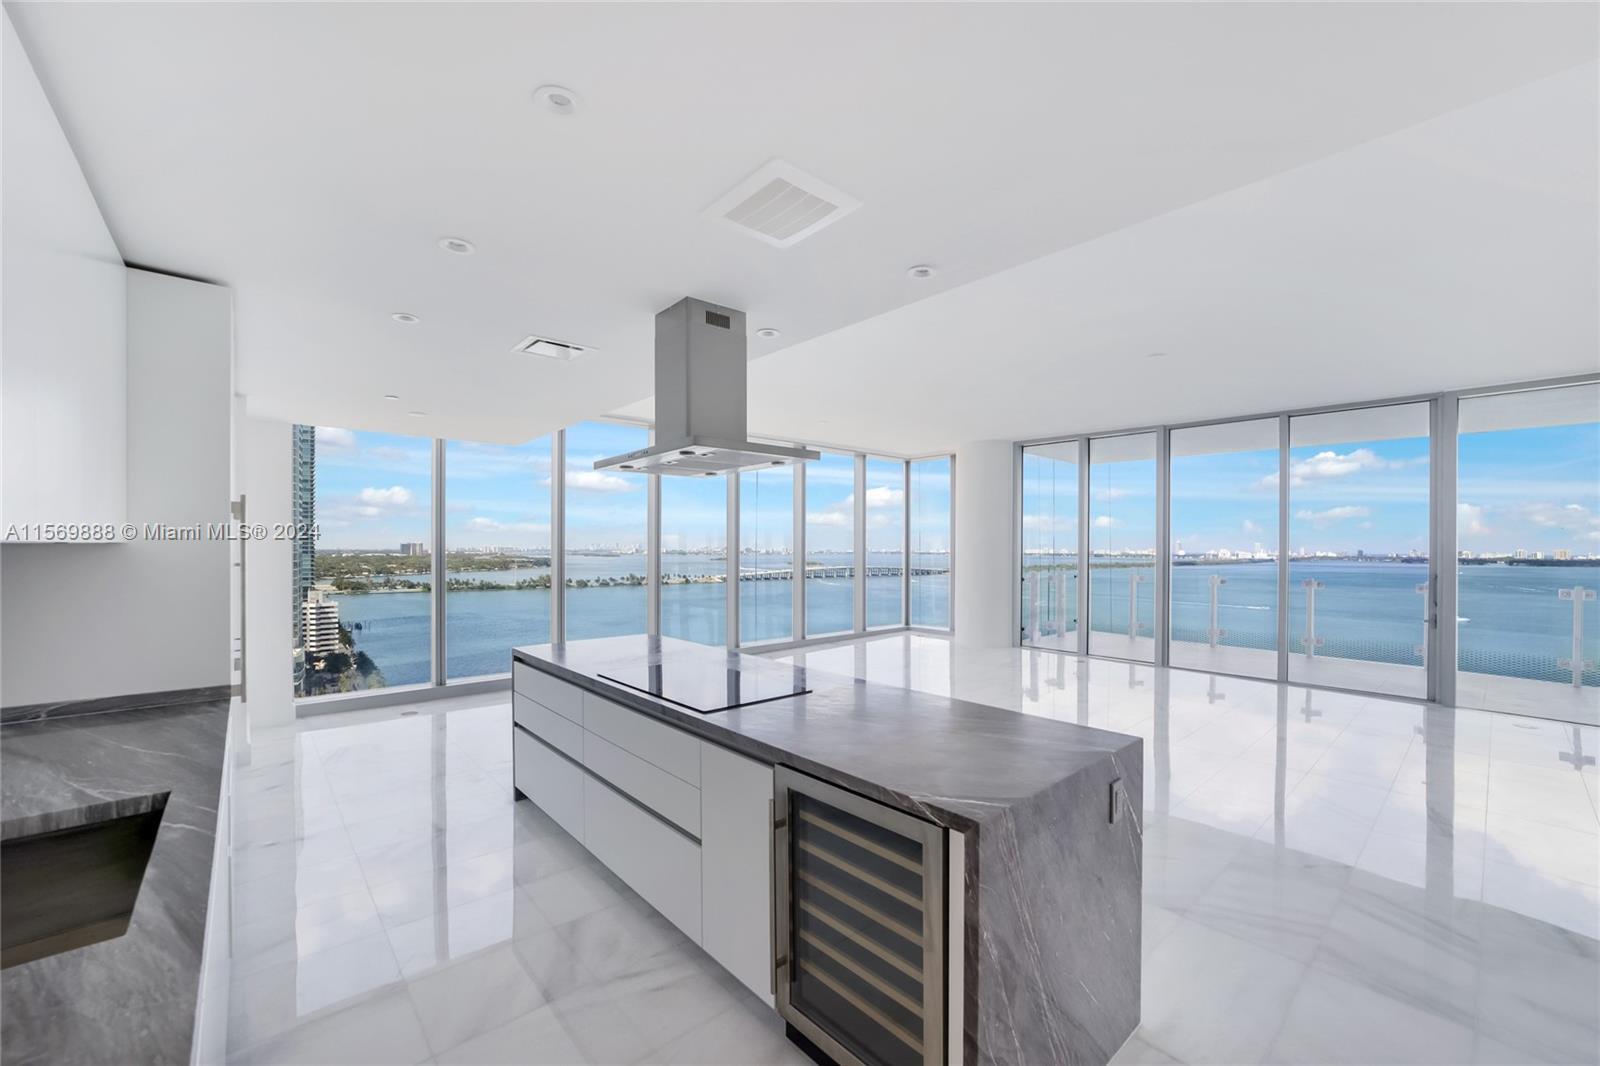 Experience waterfront luxury living at its finest in this stunning Missoni Baia model 01 condo. Perc